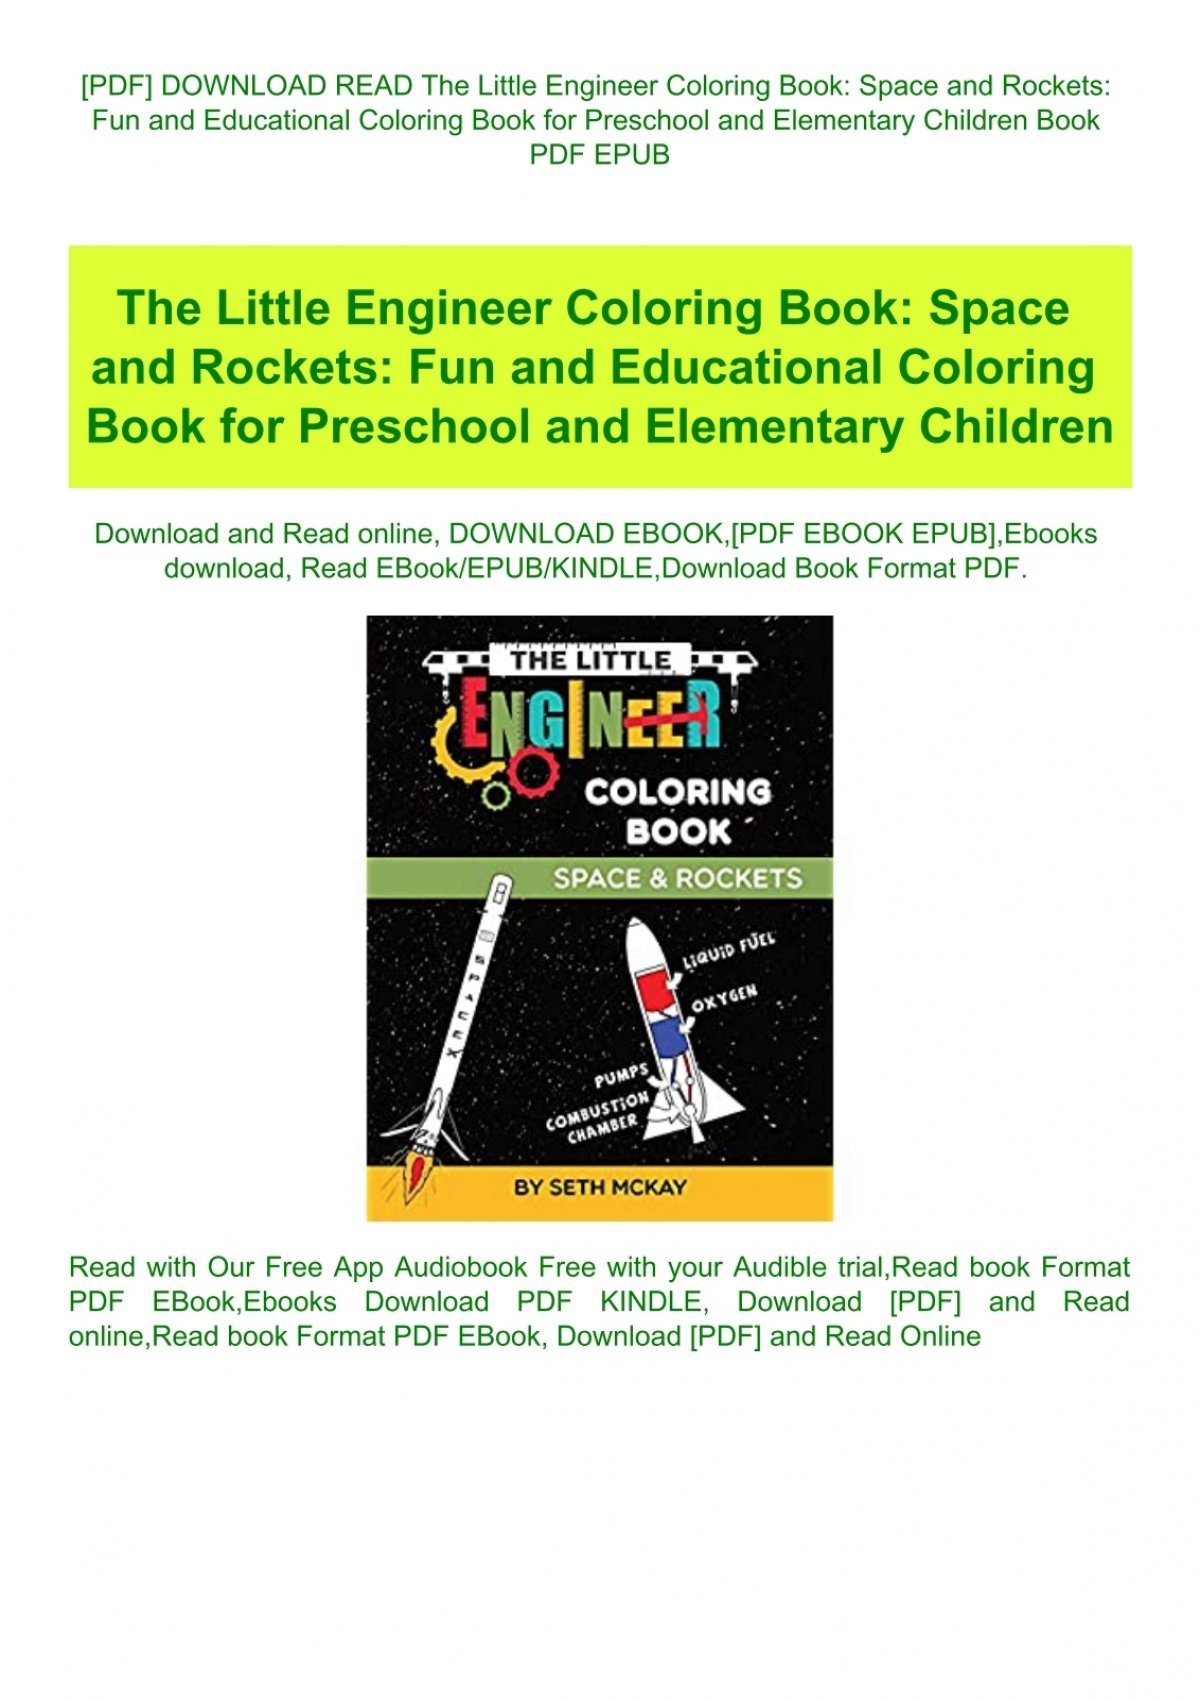 Download Pdf Download Read The Little Engineer Coloring Book Space And Rockets Fun And Educational Coloring Book For Preschool And Elementary Children Book Pdf Epub